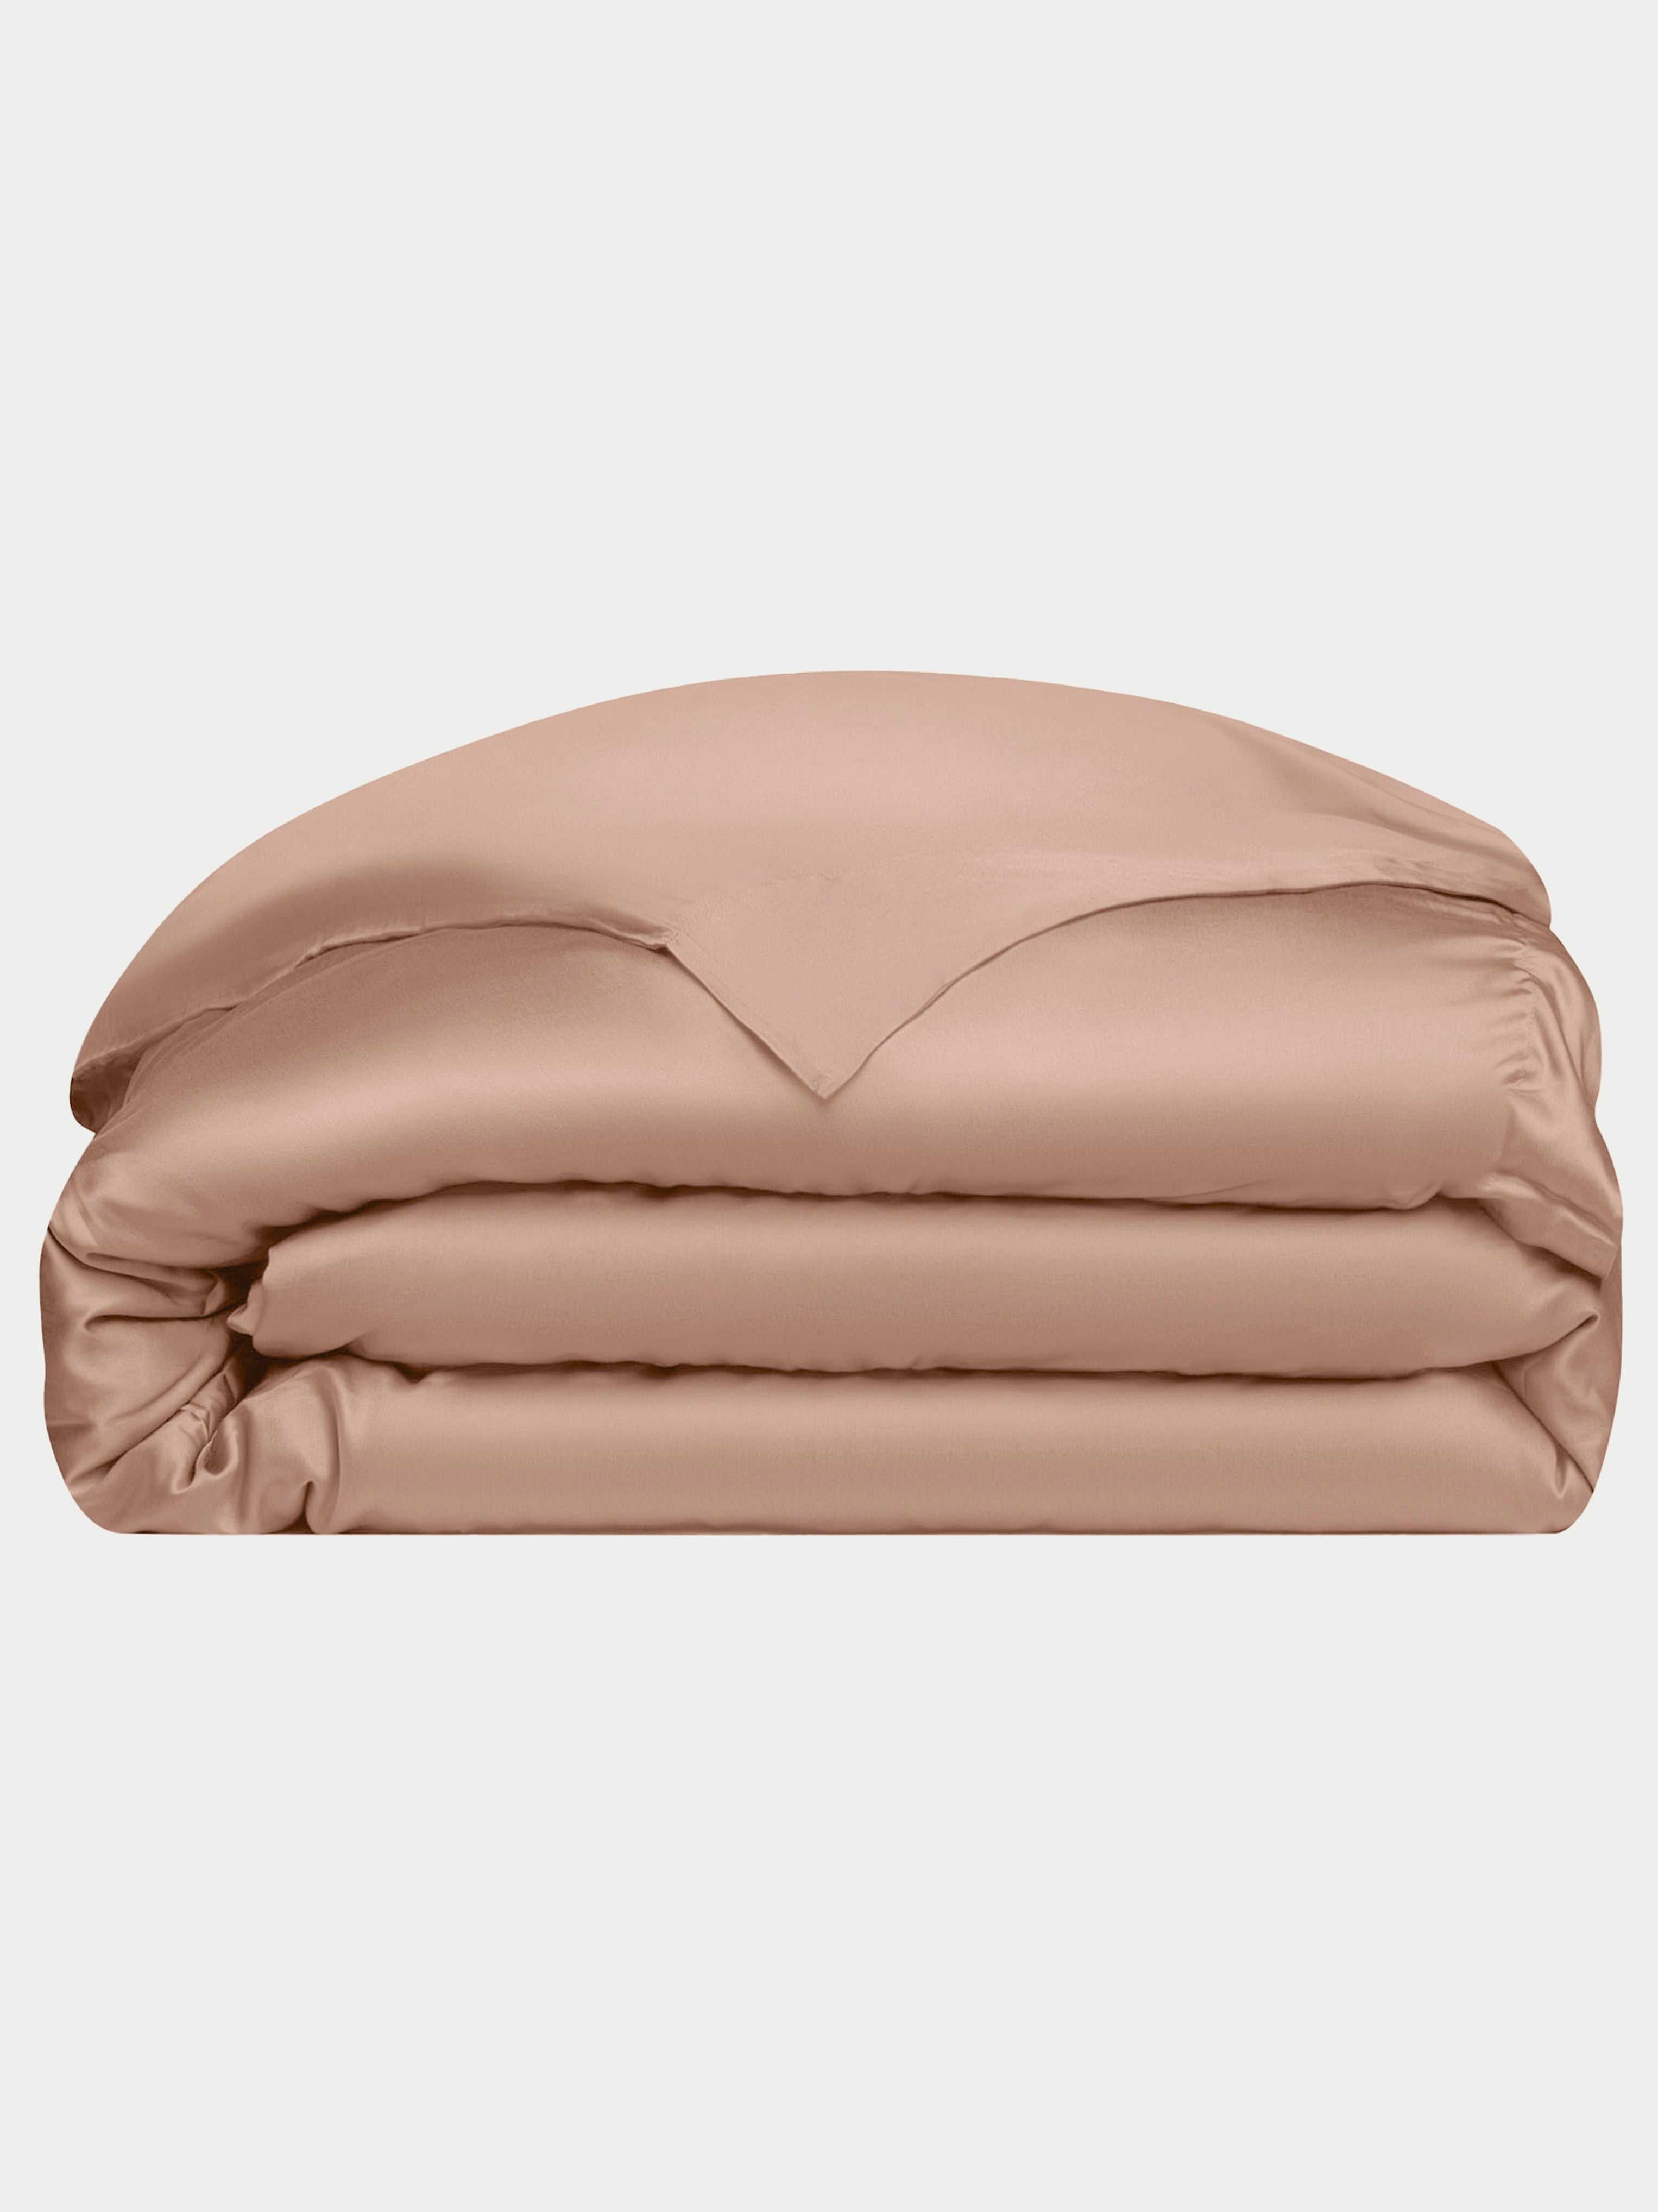 Bamboo Viscose Duvet Cover in Clay (Size: Queen/Full) - Cozy Earth